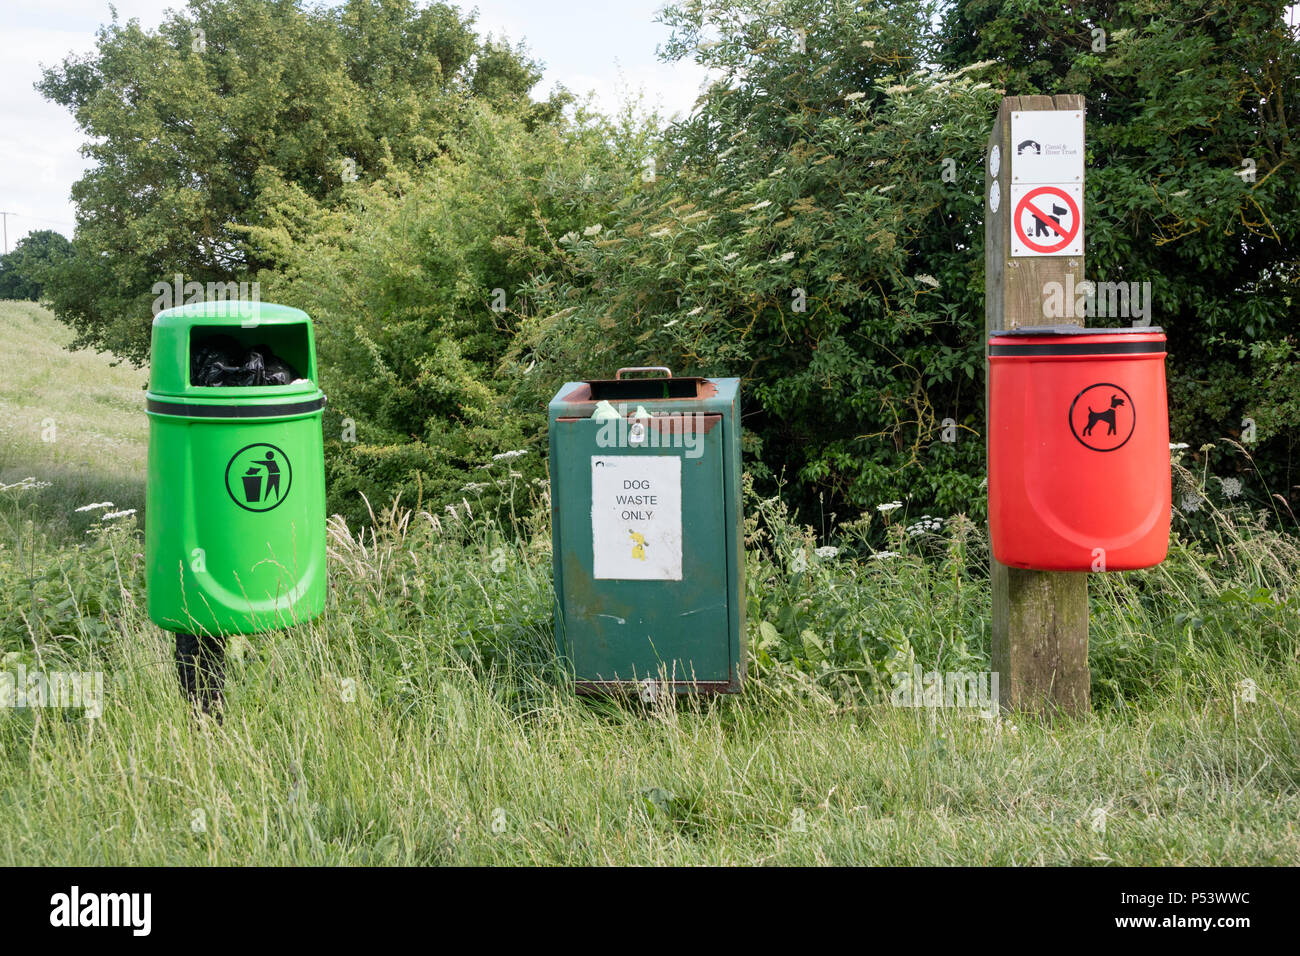 Dog poo and litter bins in the countryside, England, UK Stock Photo